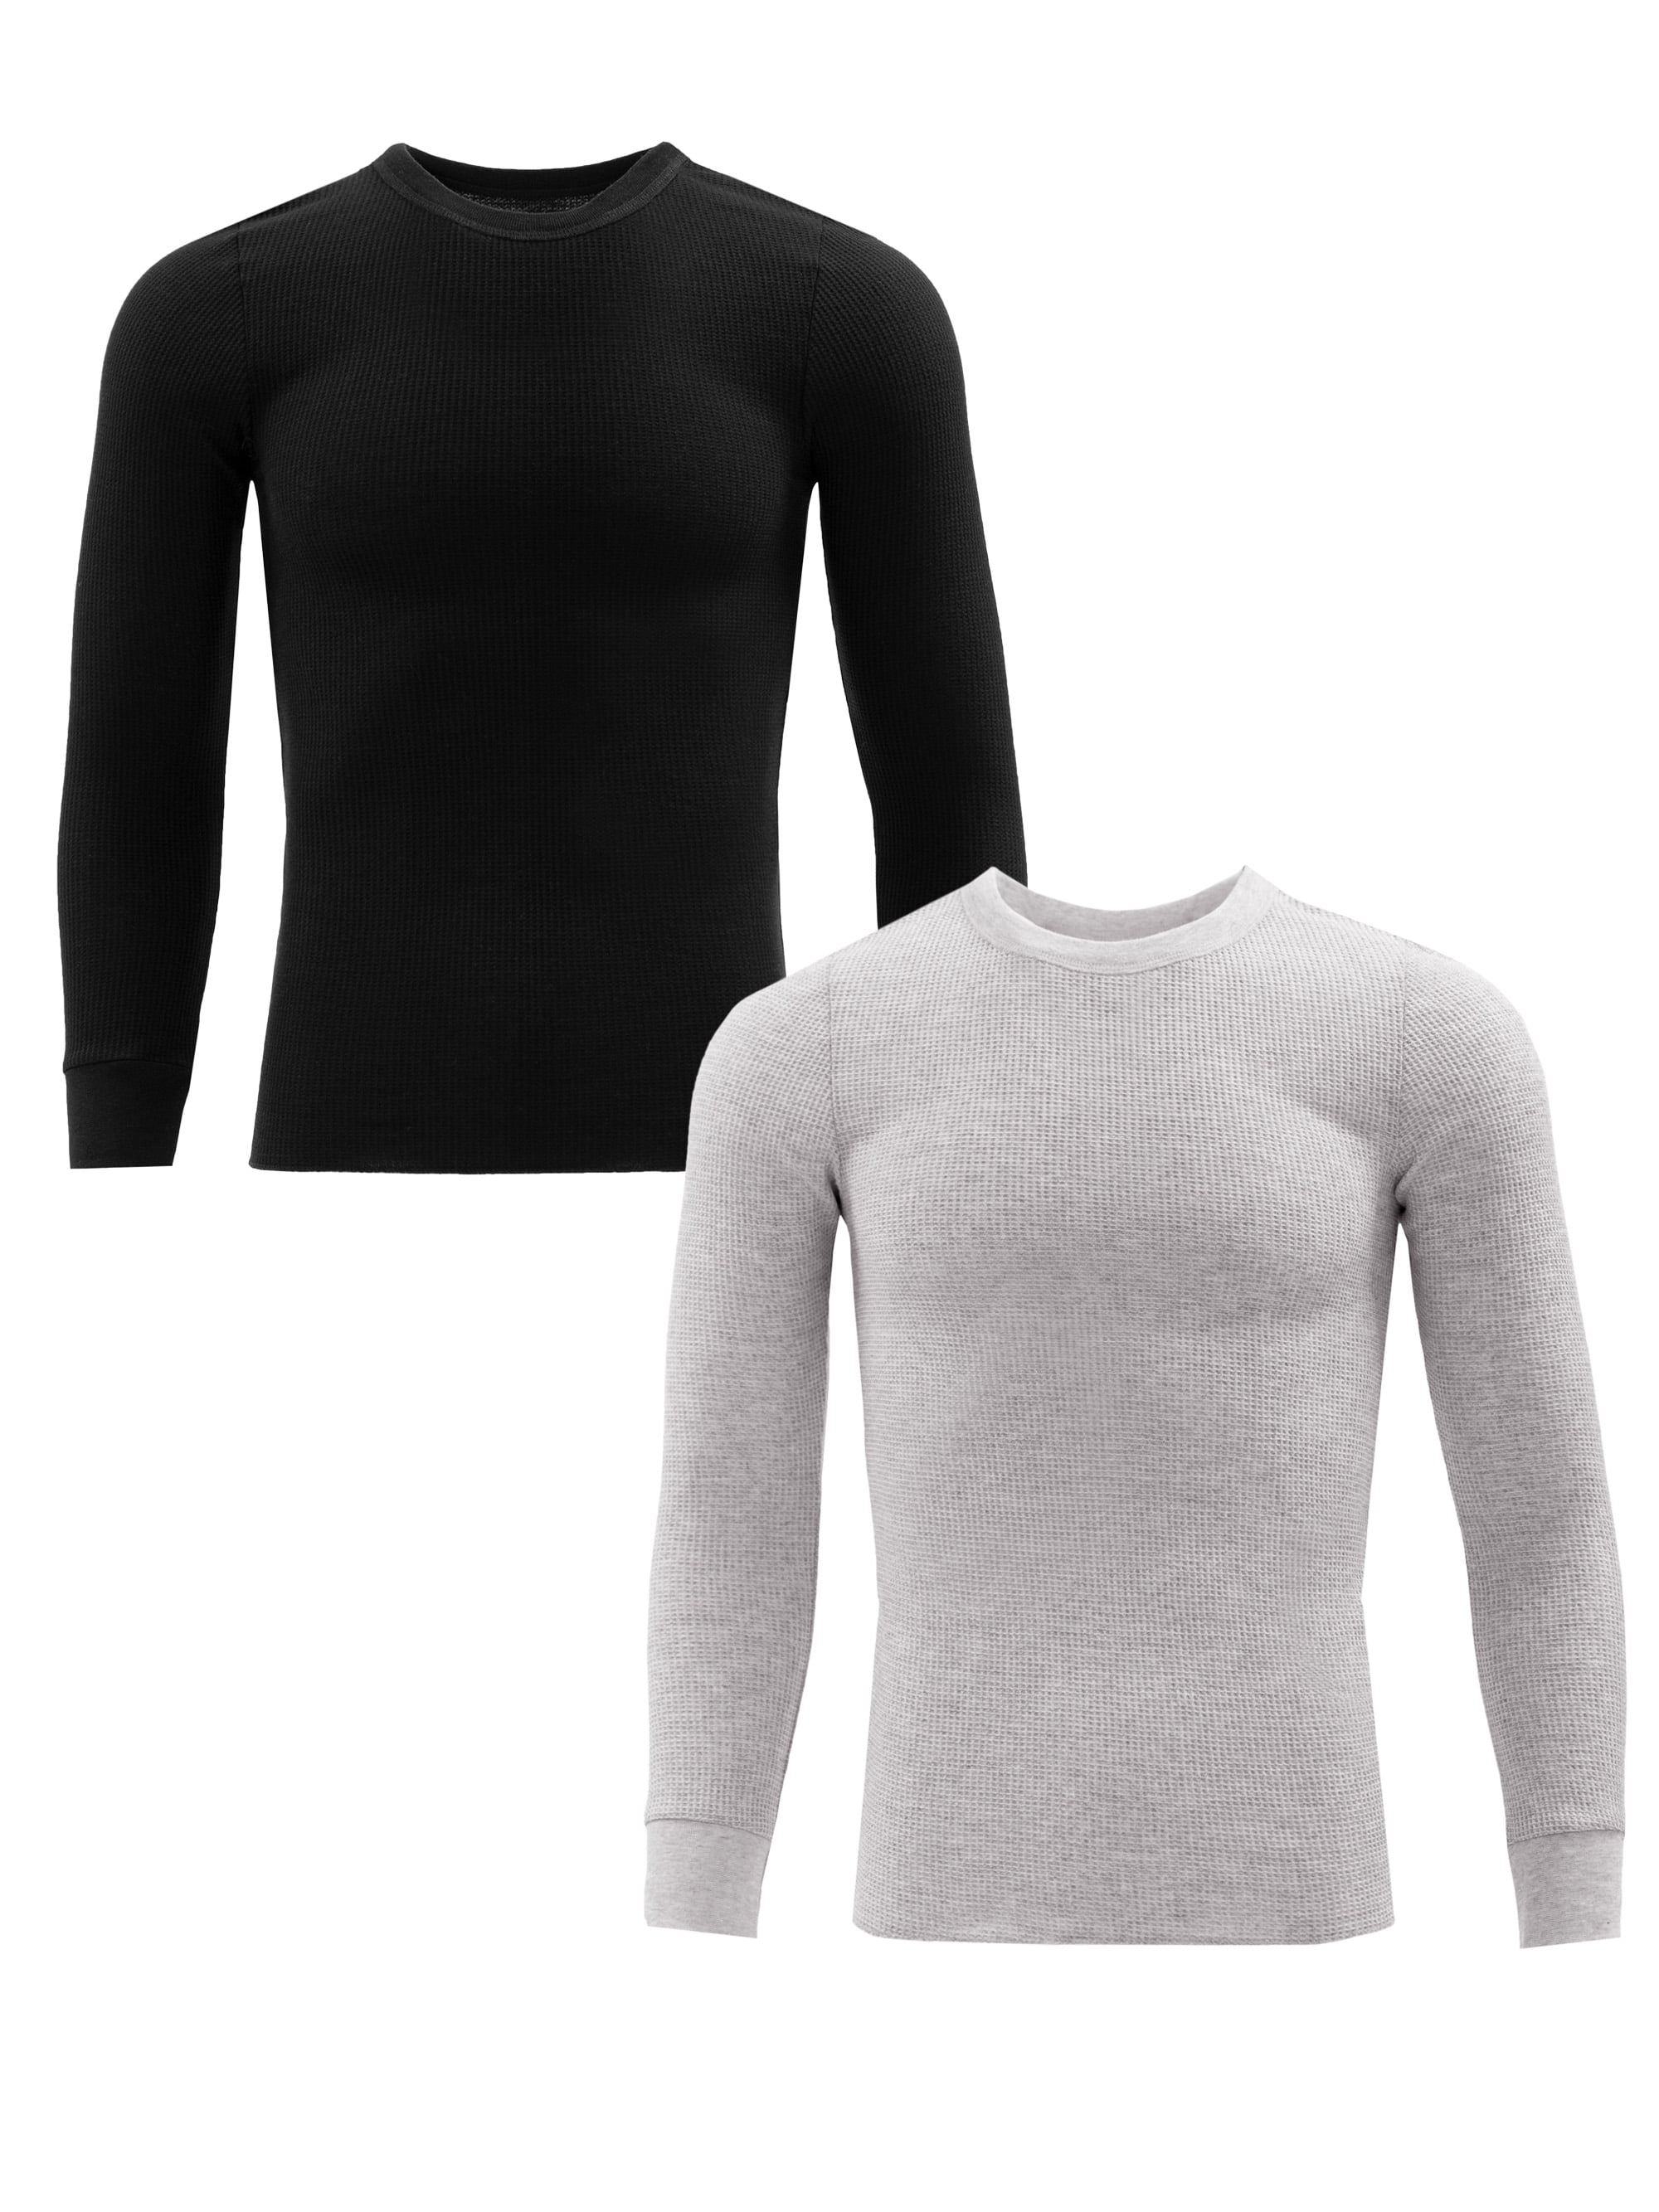 Fruit of the Loom Men's Thermal Waffle Top, 2-Pack, S-5XL - Walmart.com